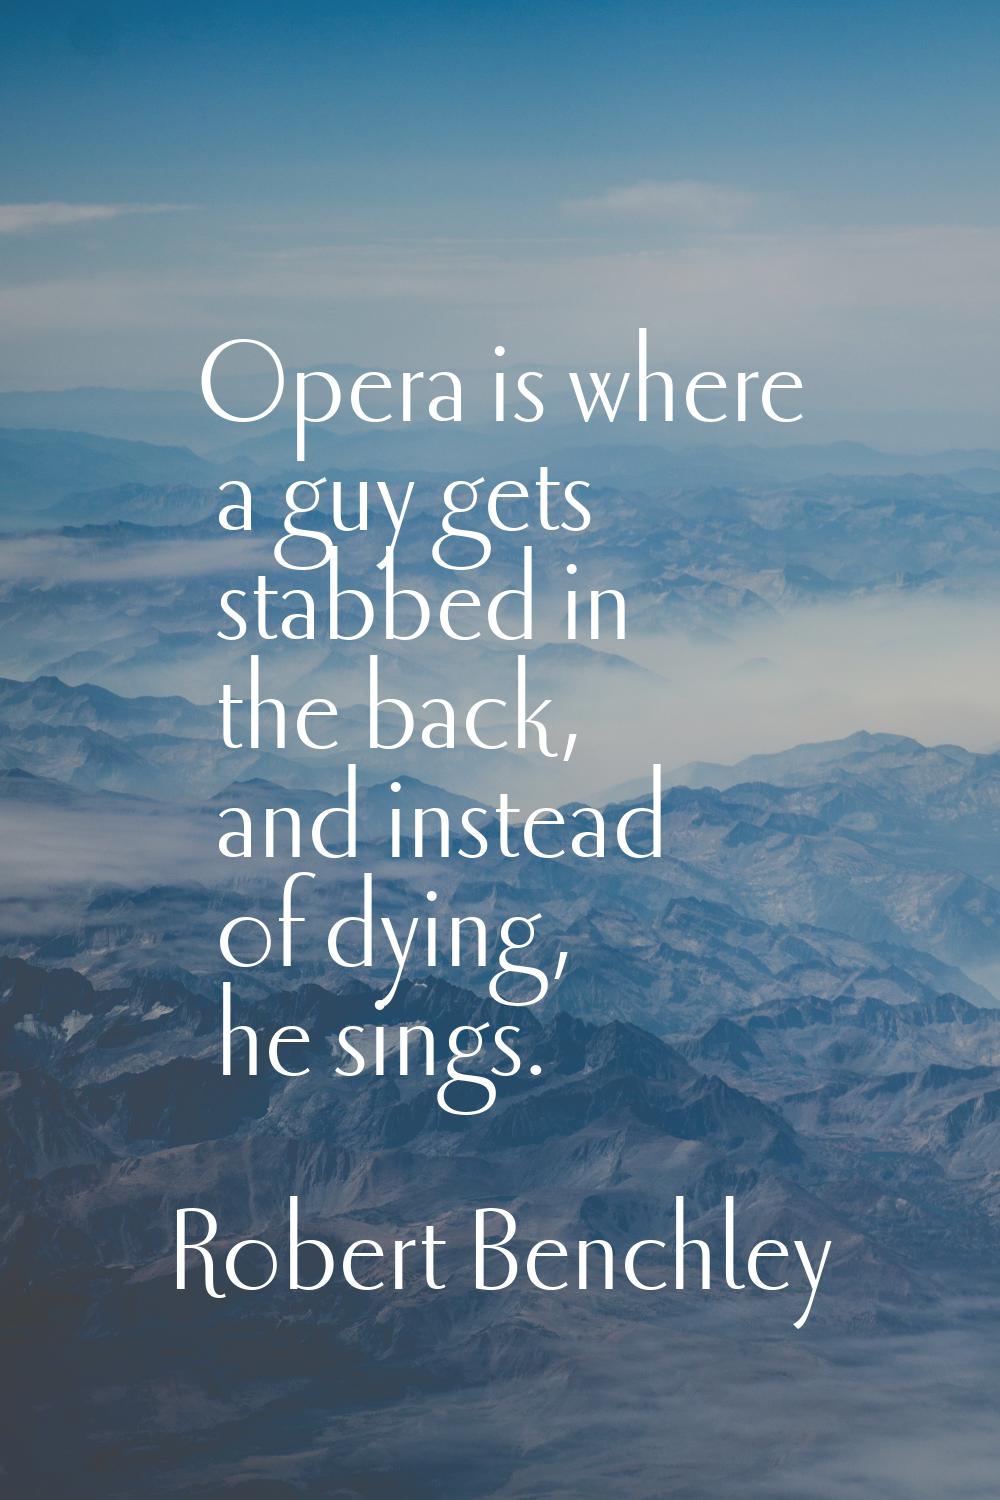 Opera is where a guy gets stabbed in the back, and instead of dying, he sings.